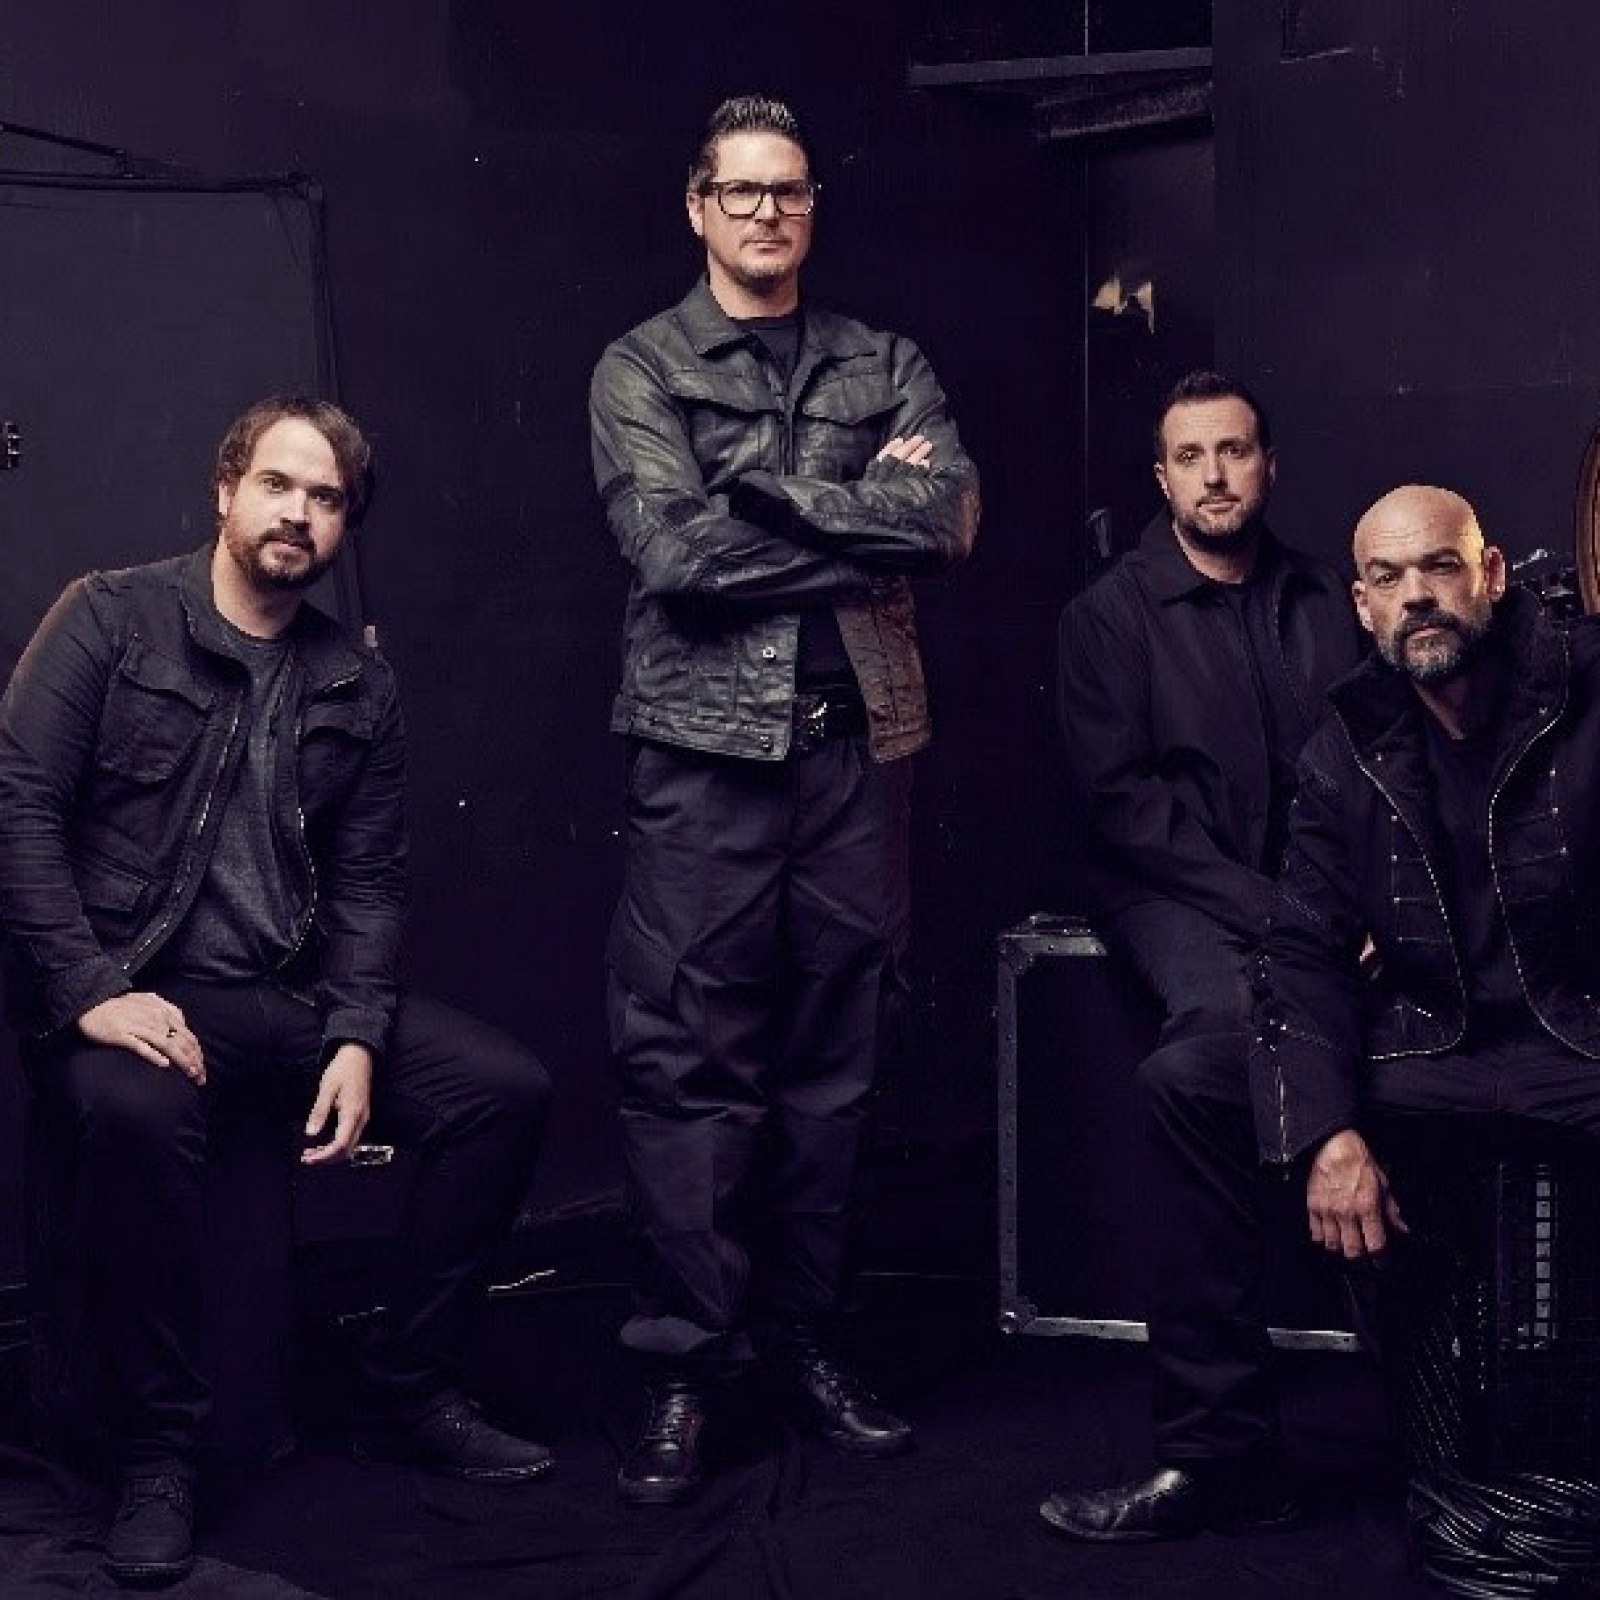 where was ghost adventures for halloween 2020 Ghost Adventures Crew To Investigate Real Conjuring House In 2019 Halloween Special where was ghost adventures for halloween 2020